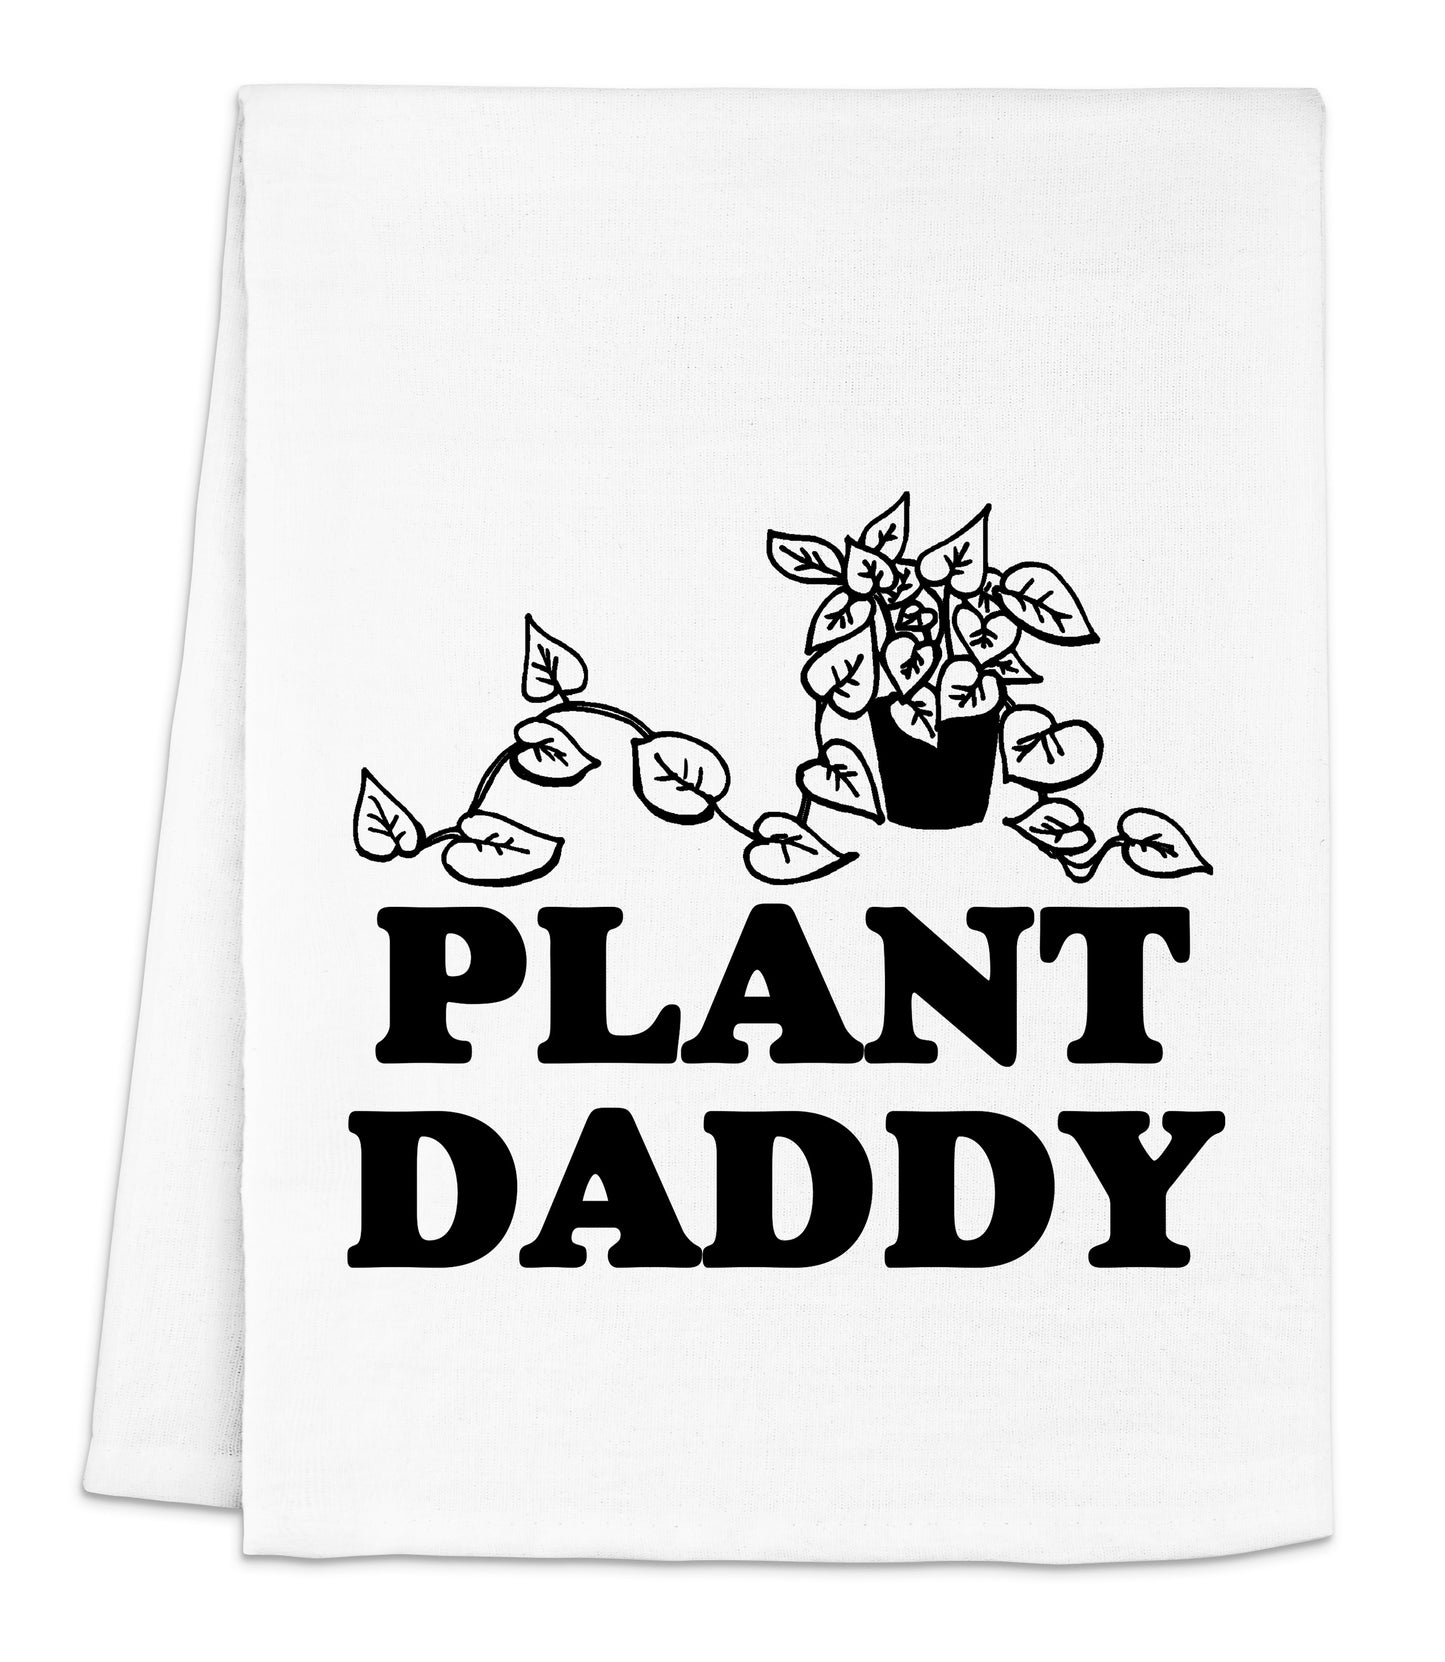 a white towel with a plant daddy on it